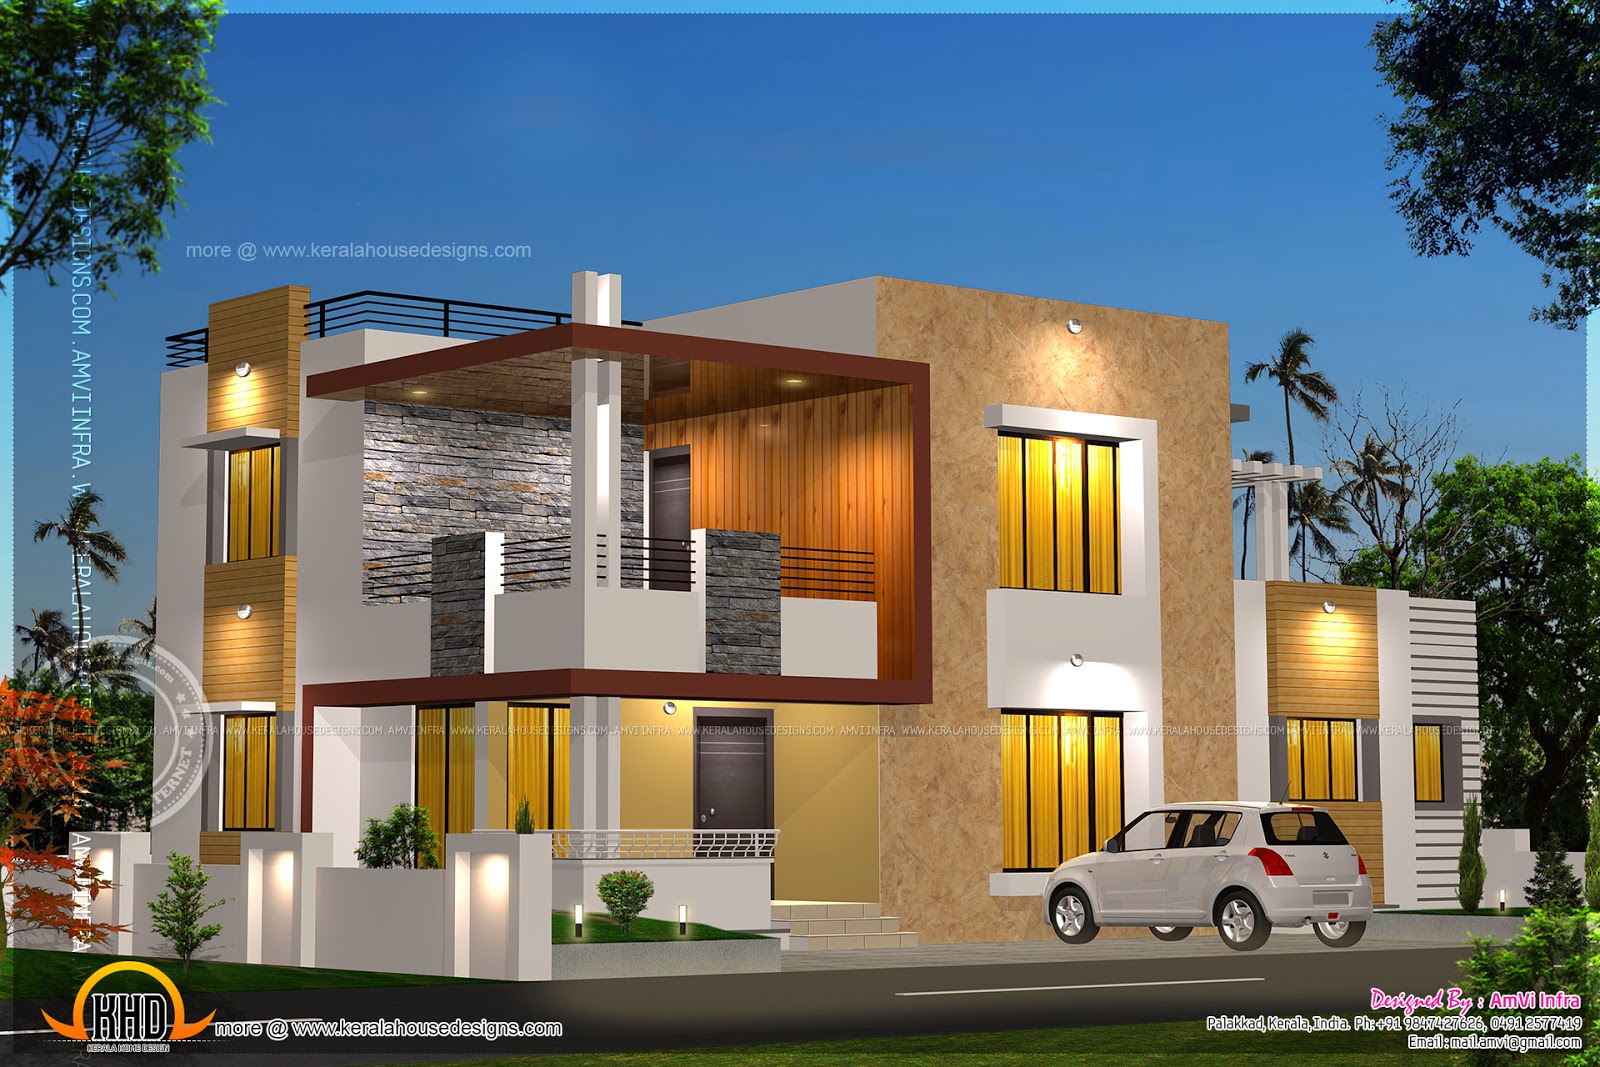  Floor  plan  and elevation  of modern  house  Home  Kerala Plans 